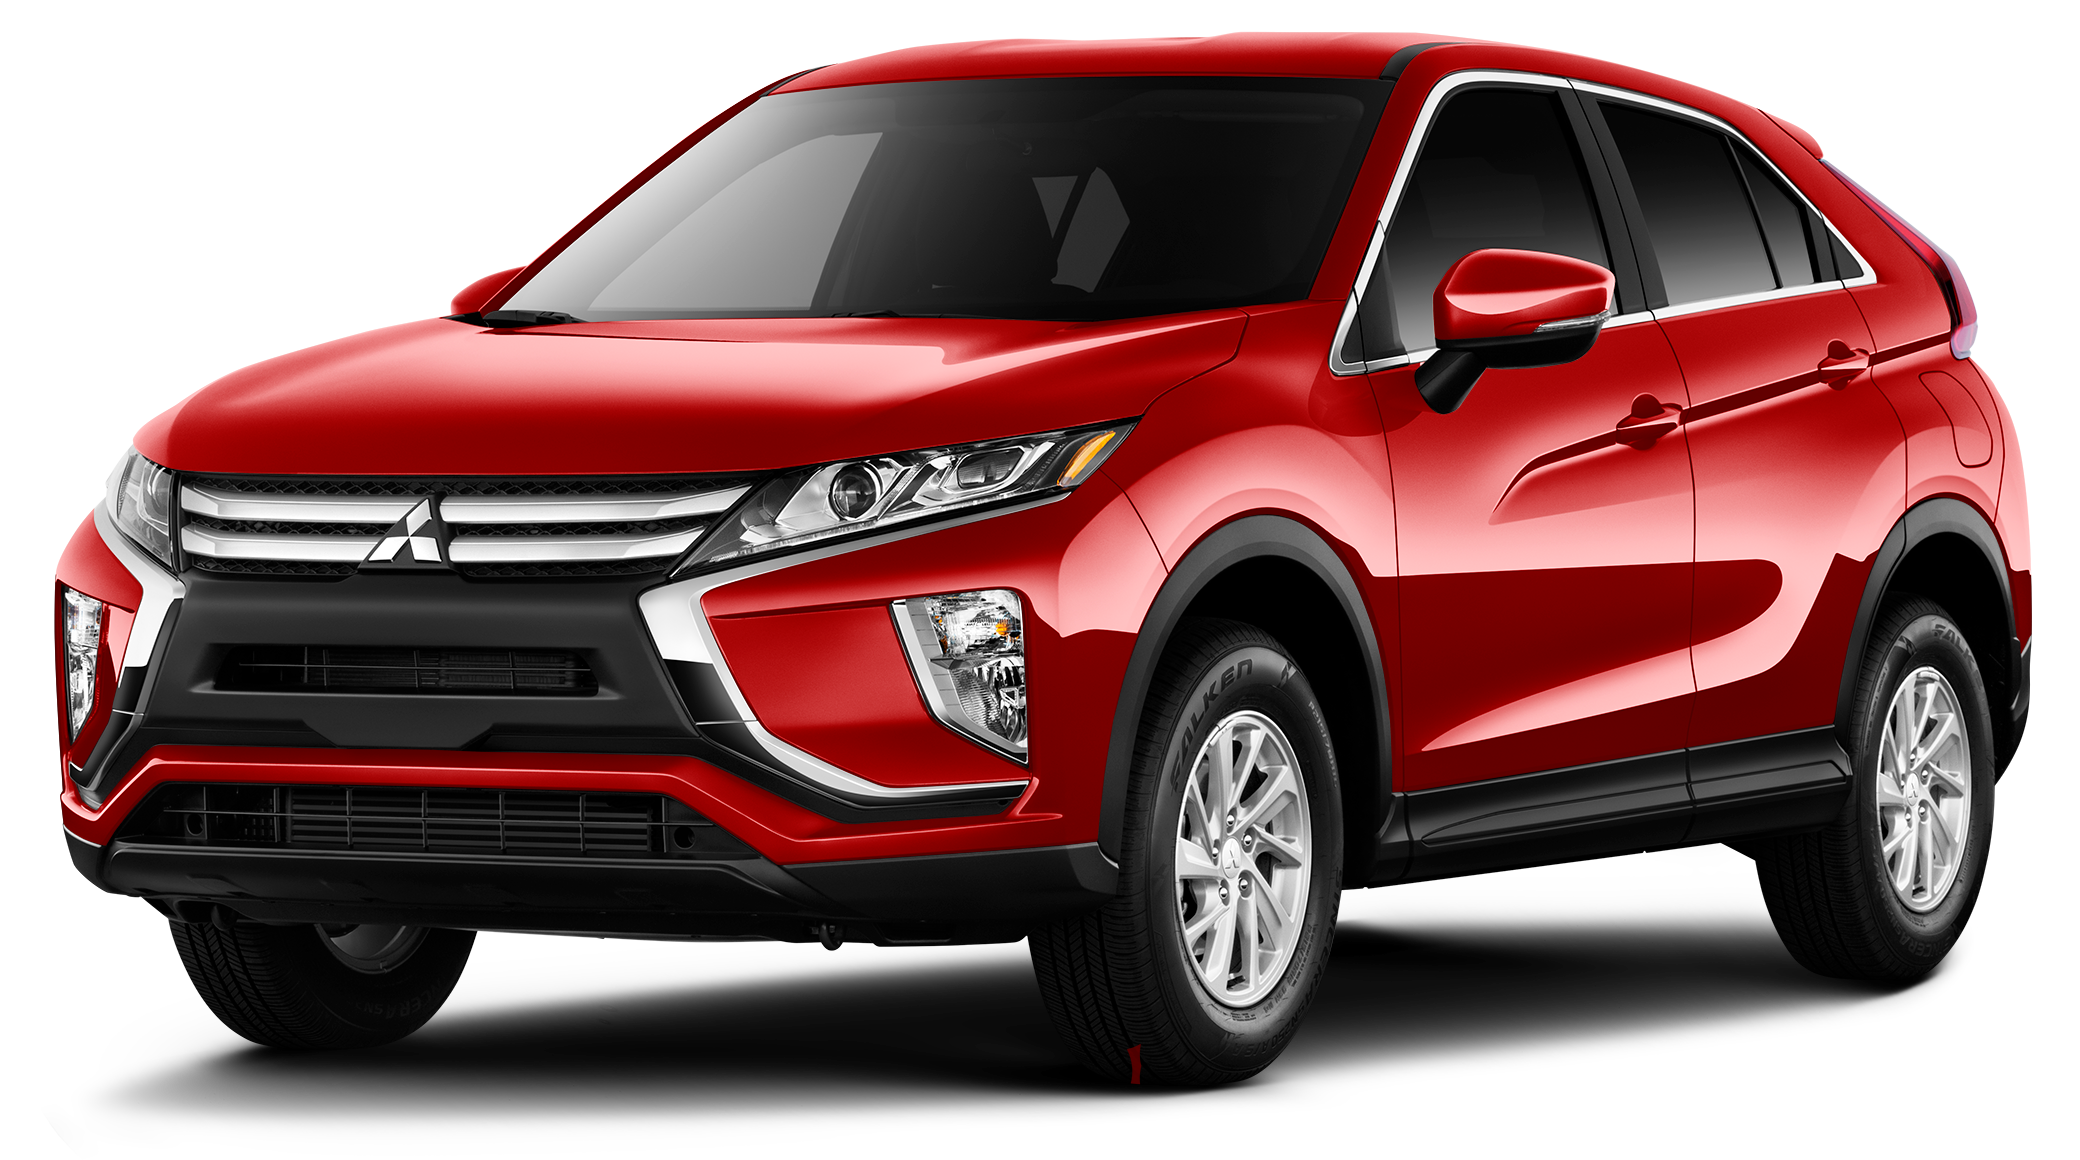 2018 Mitsubishi Eclipse Cross Incentives Specials Offers In 